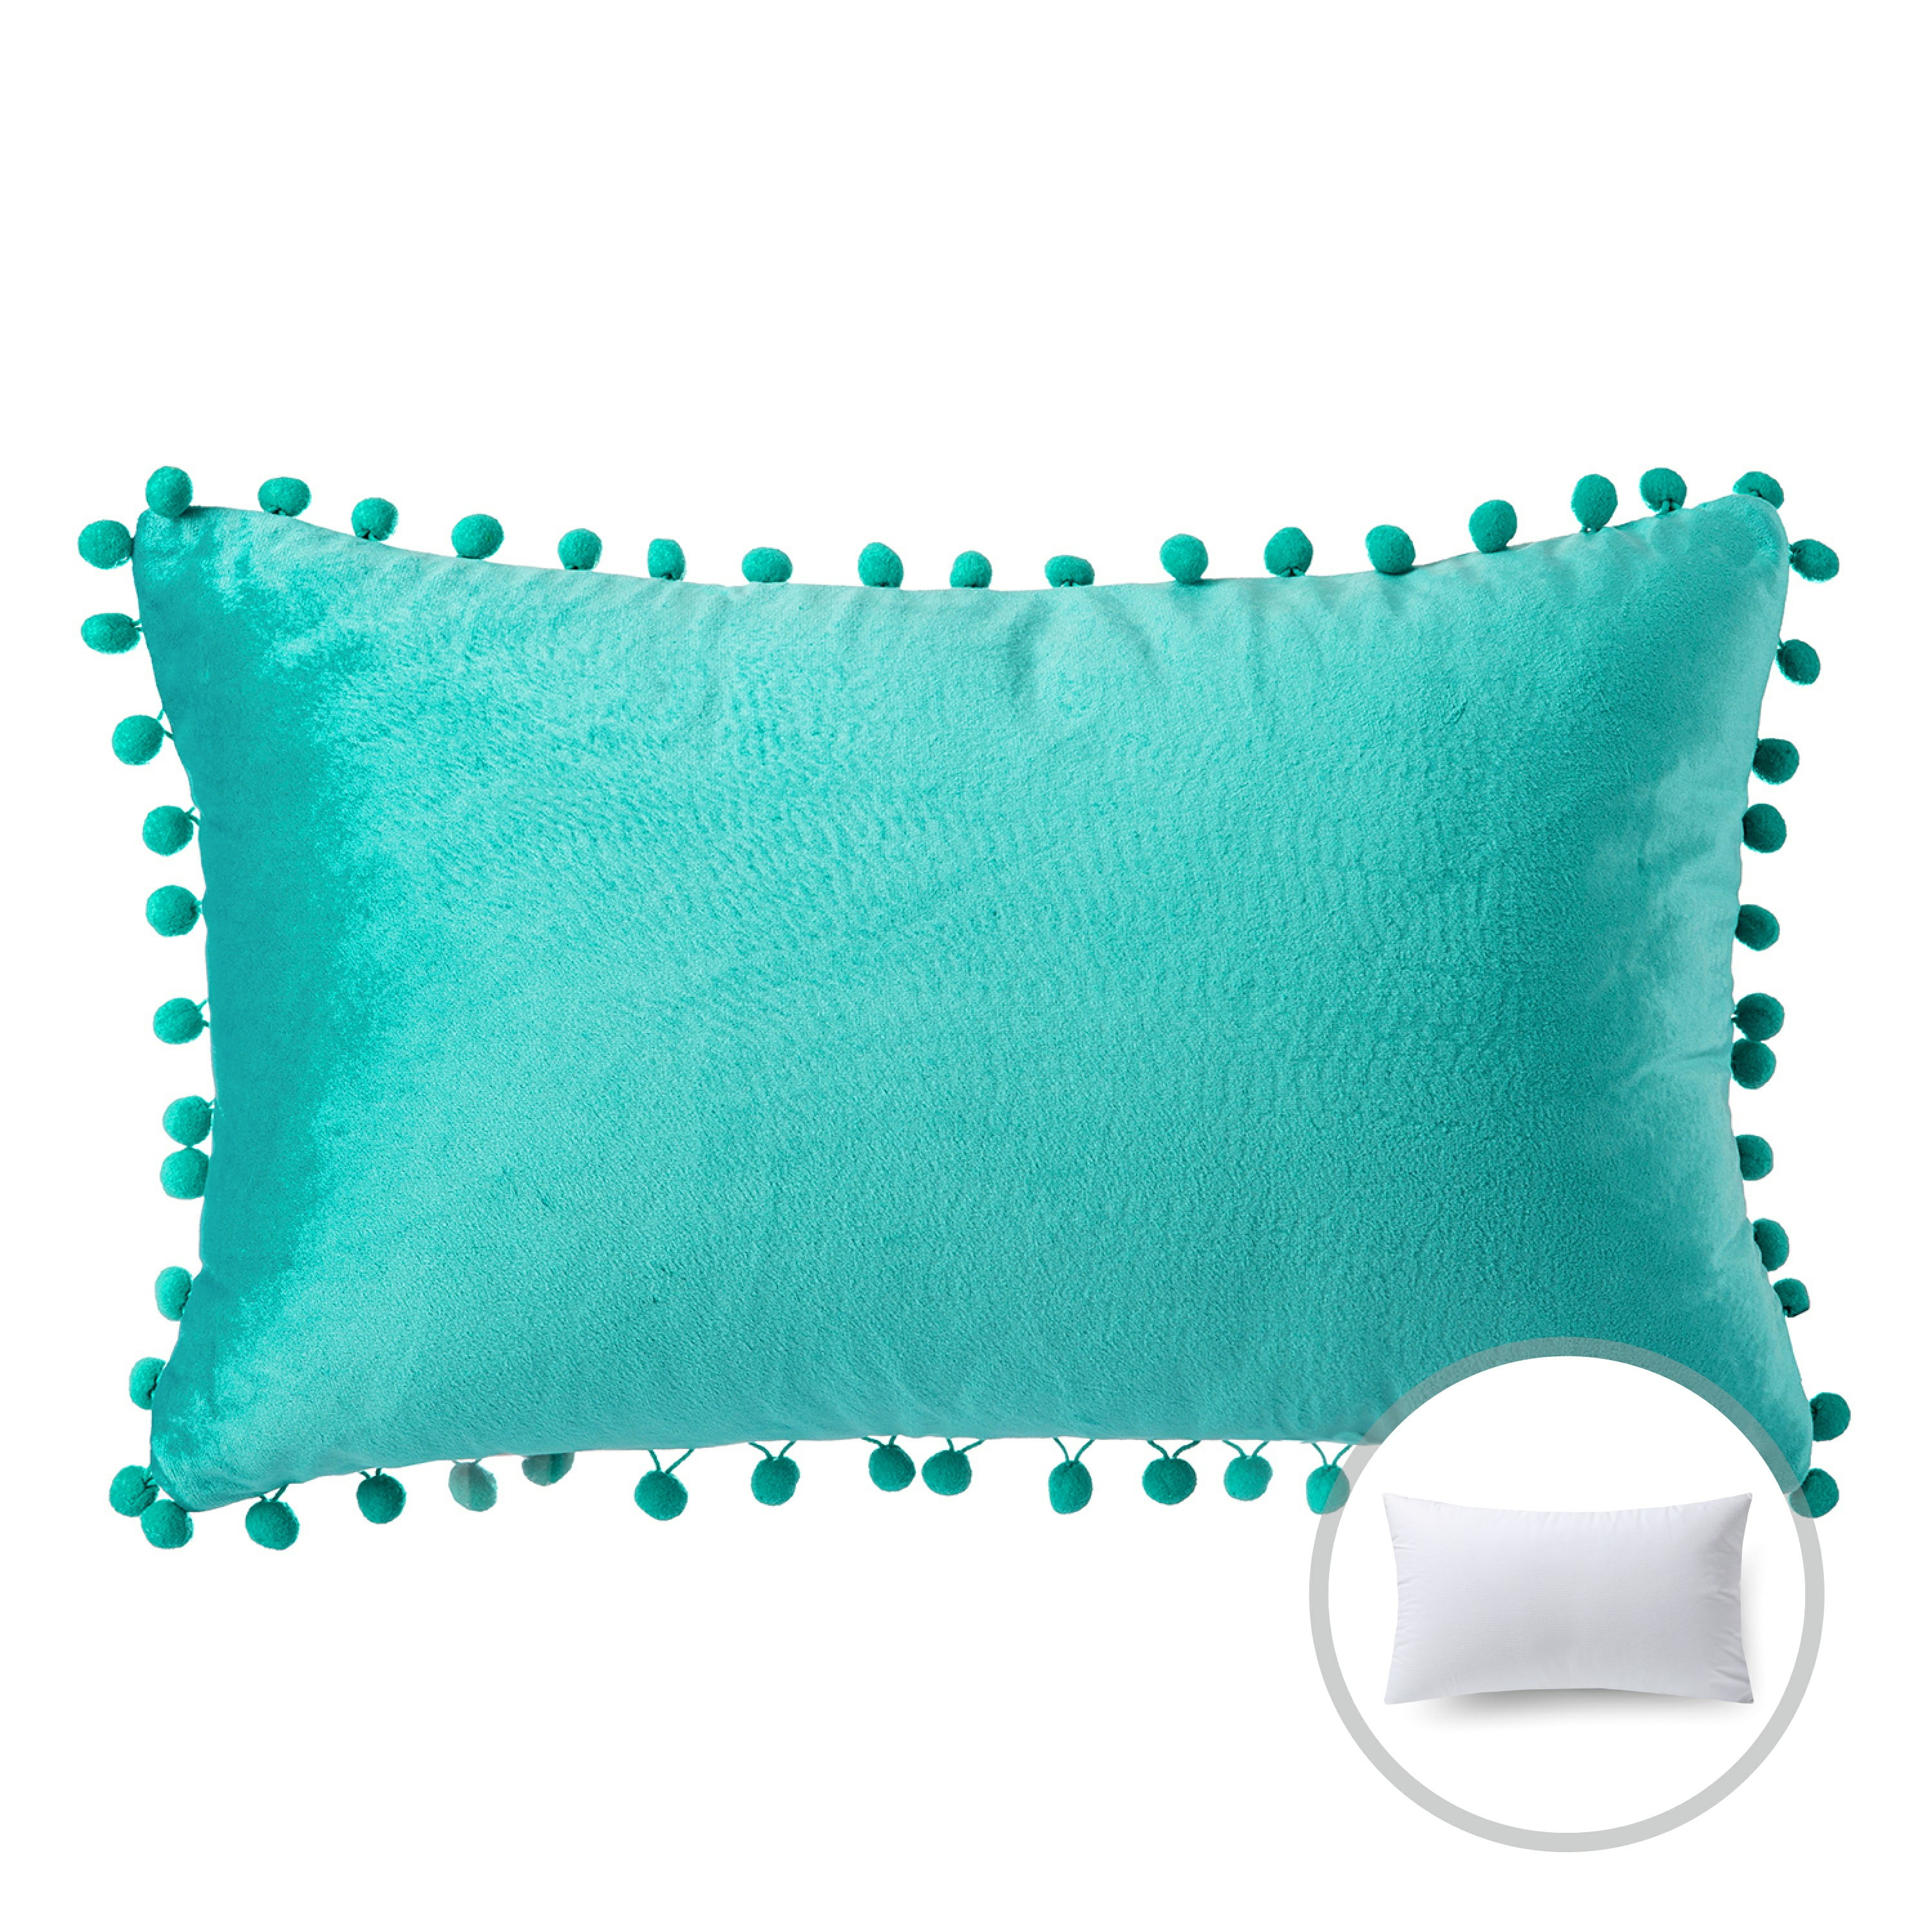 Phonoscope Bronzing Soft Solid Velvet Decorative Throw Pillow for Couch,  Turquoise, 12 x 20, 2 Pack